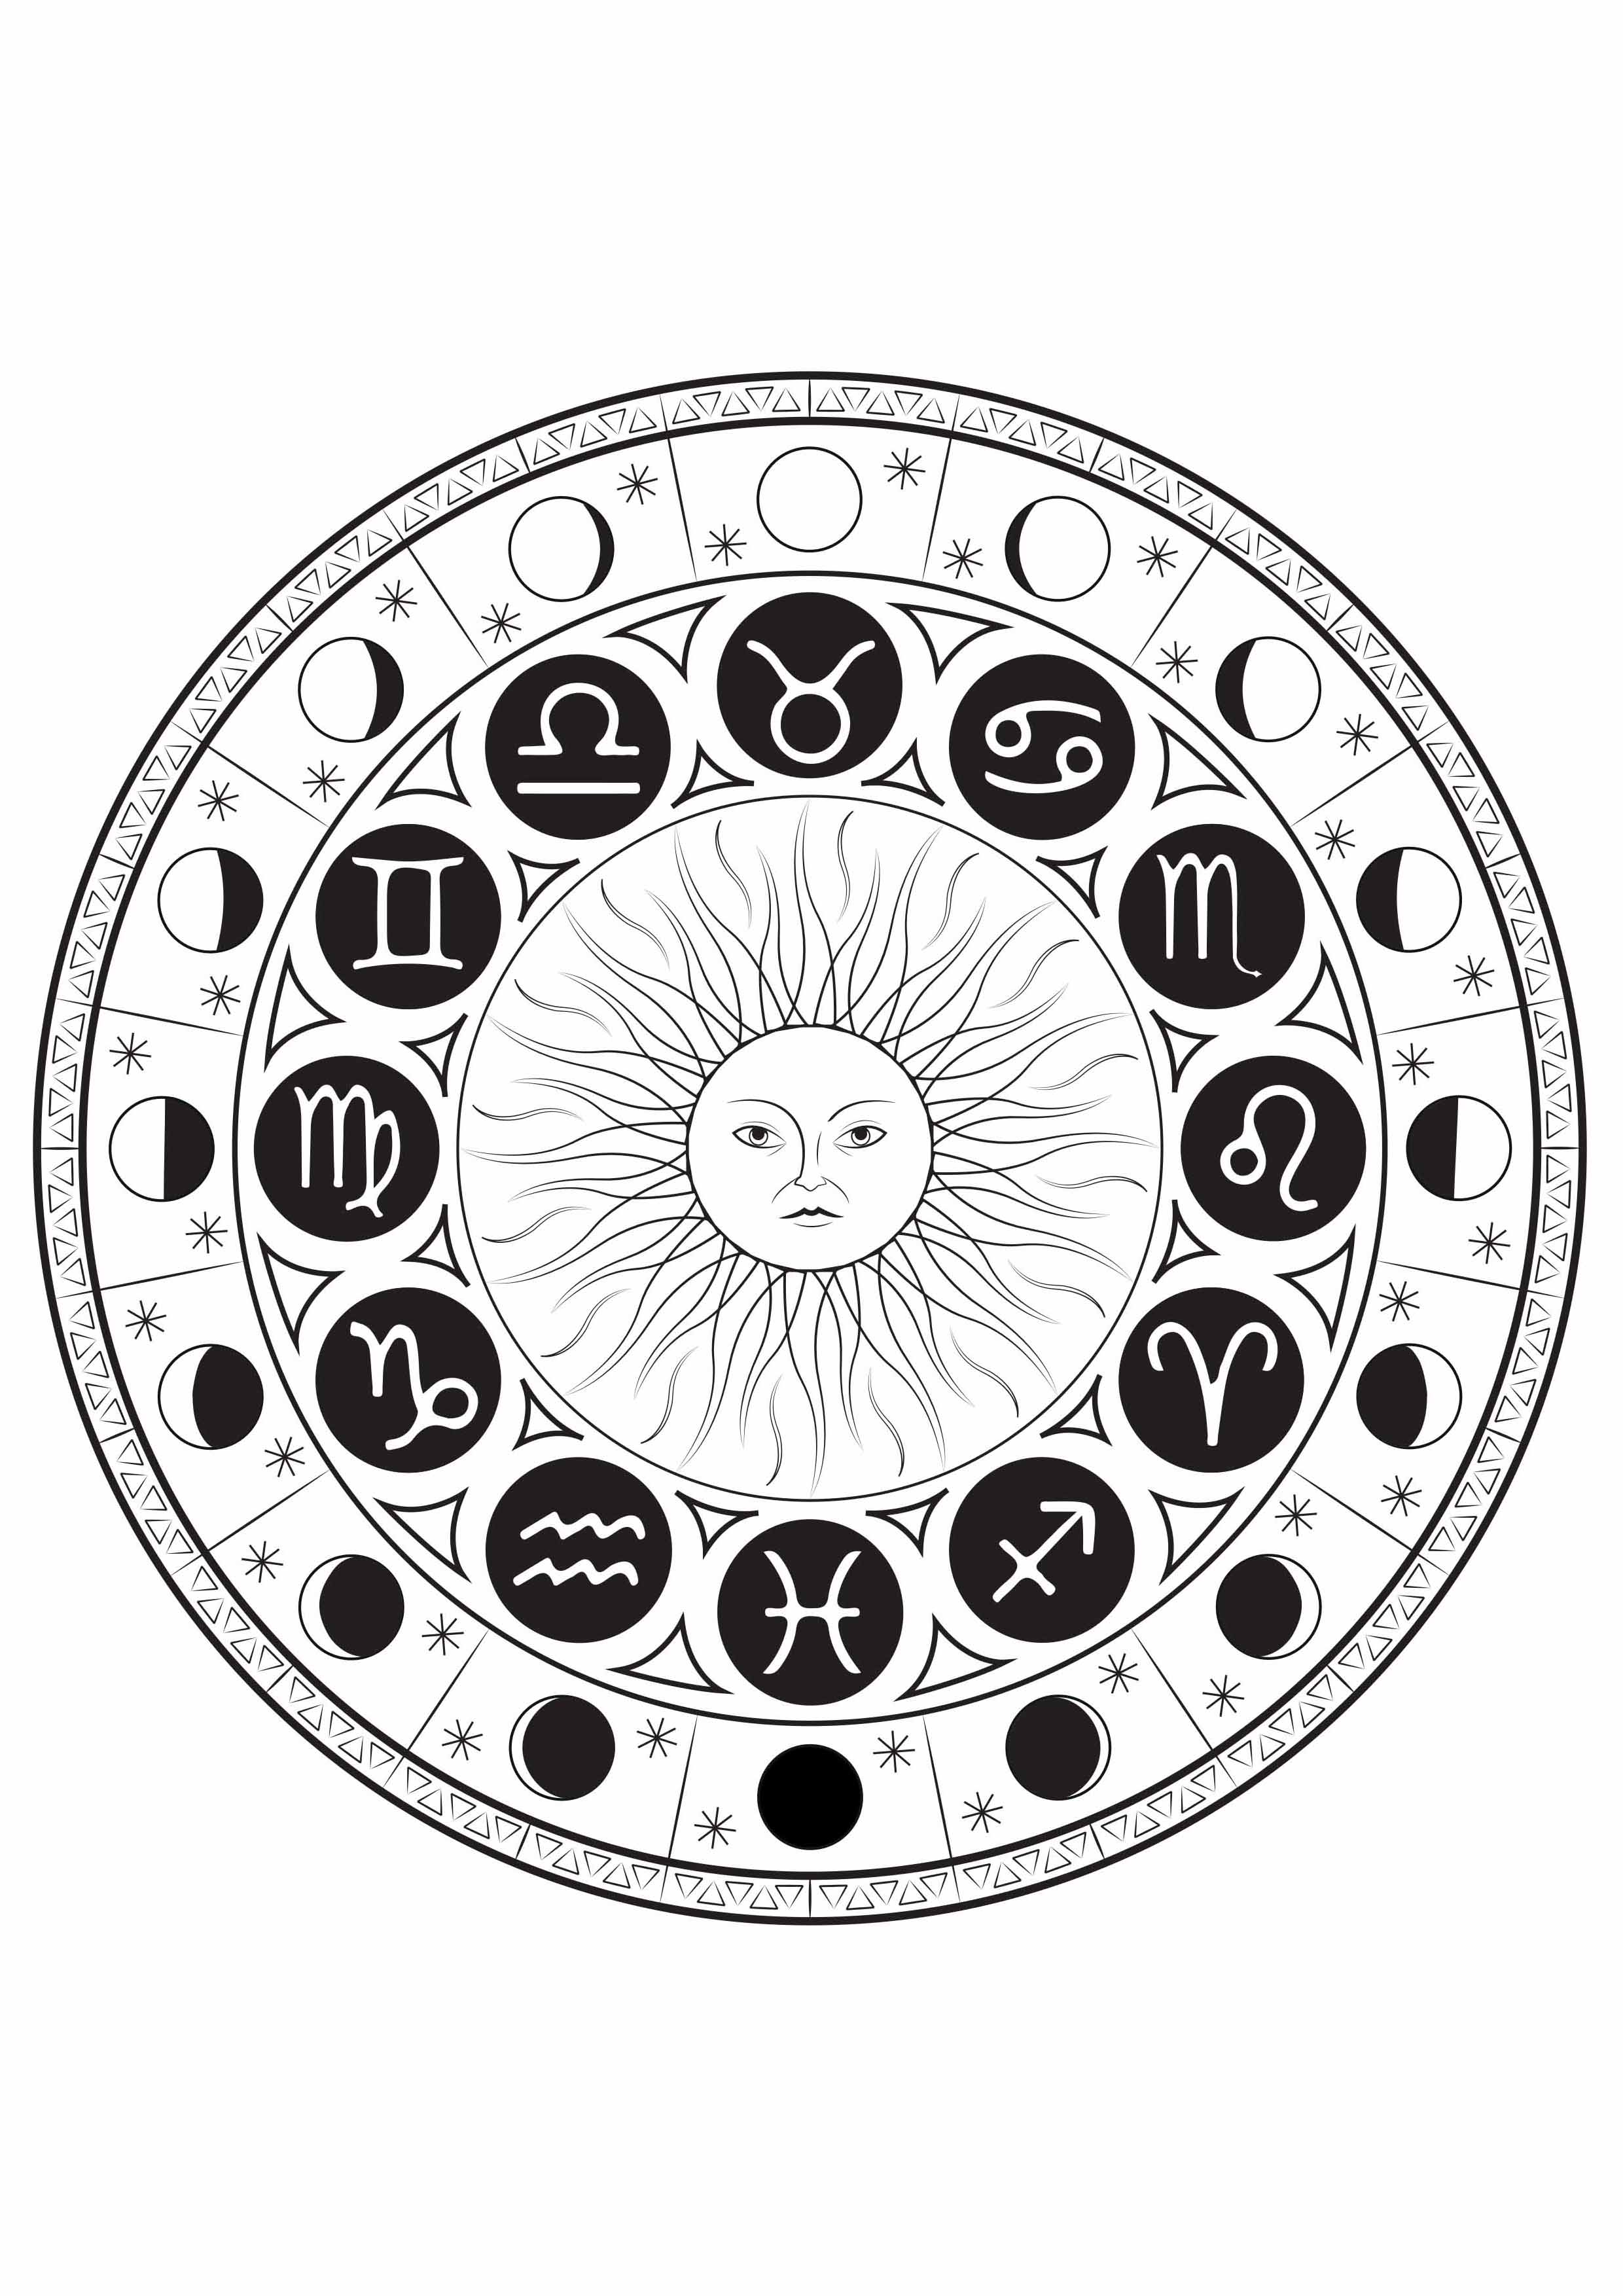 Mandala composed of astrological signs around a sun, with the cycle of the moon, Artist : Louise